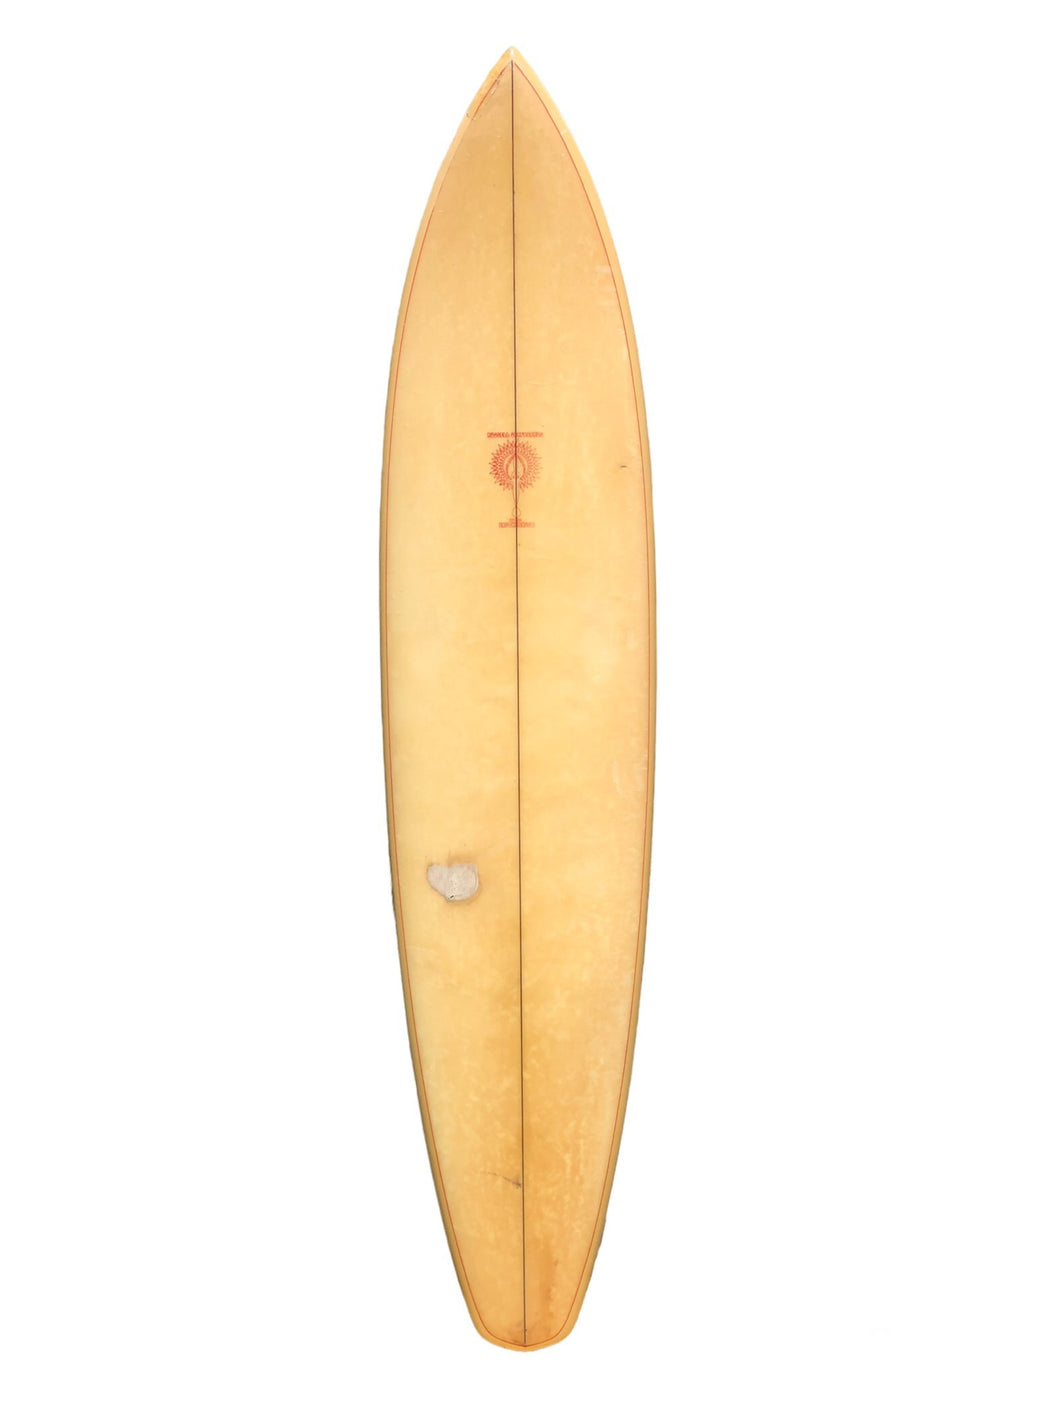 Vintage 8’0” Russell Surfboard 1970’s